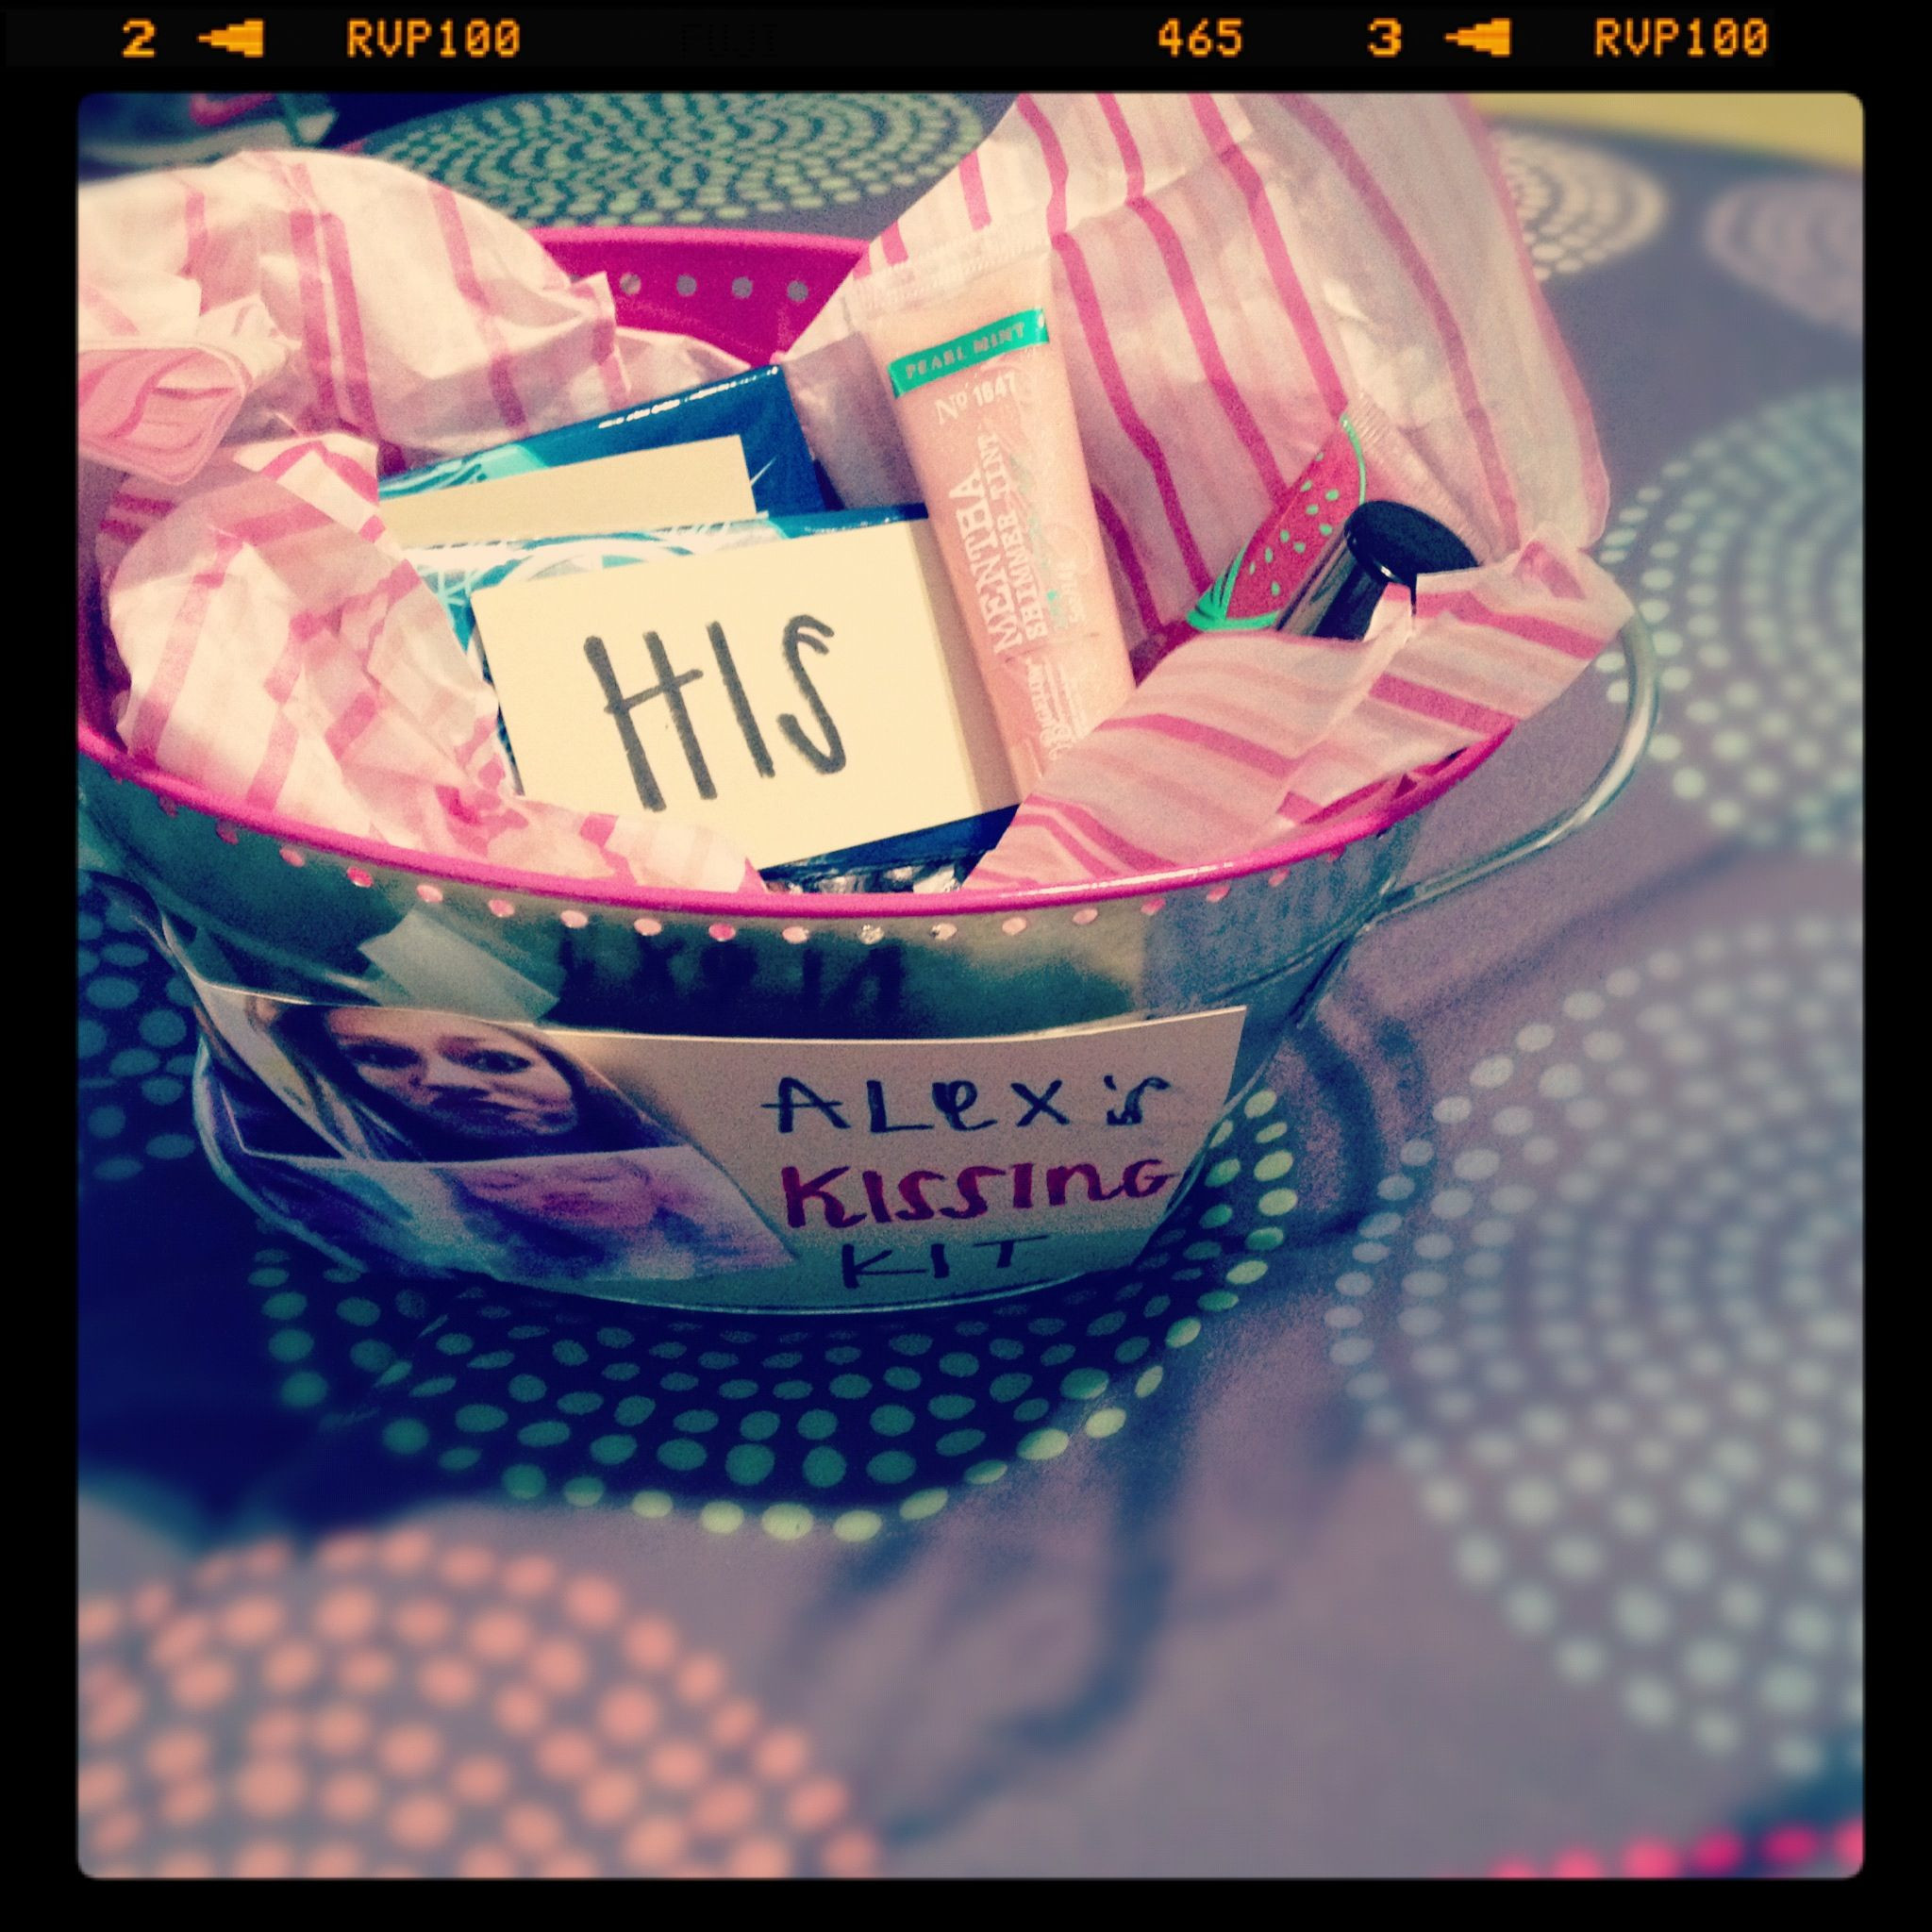 15Th Birthday Gift Ideas
 Sweet 16 kissing kit made by my cute best friend